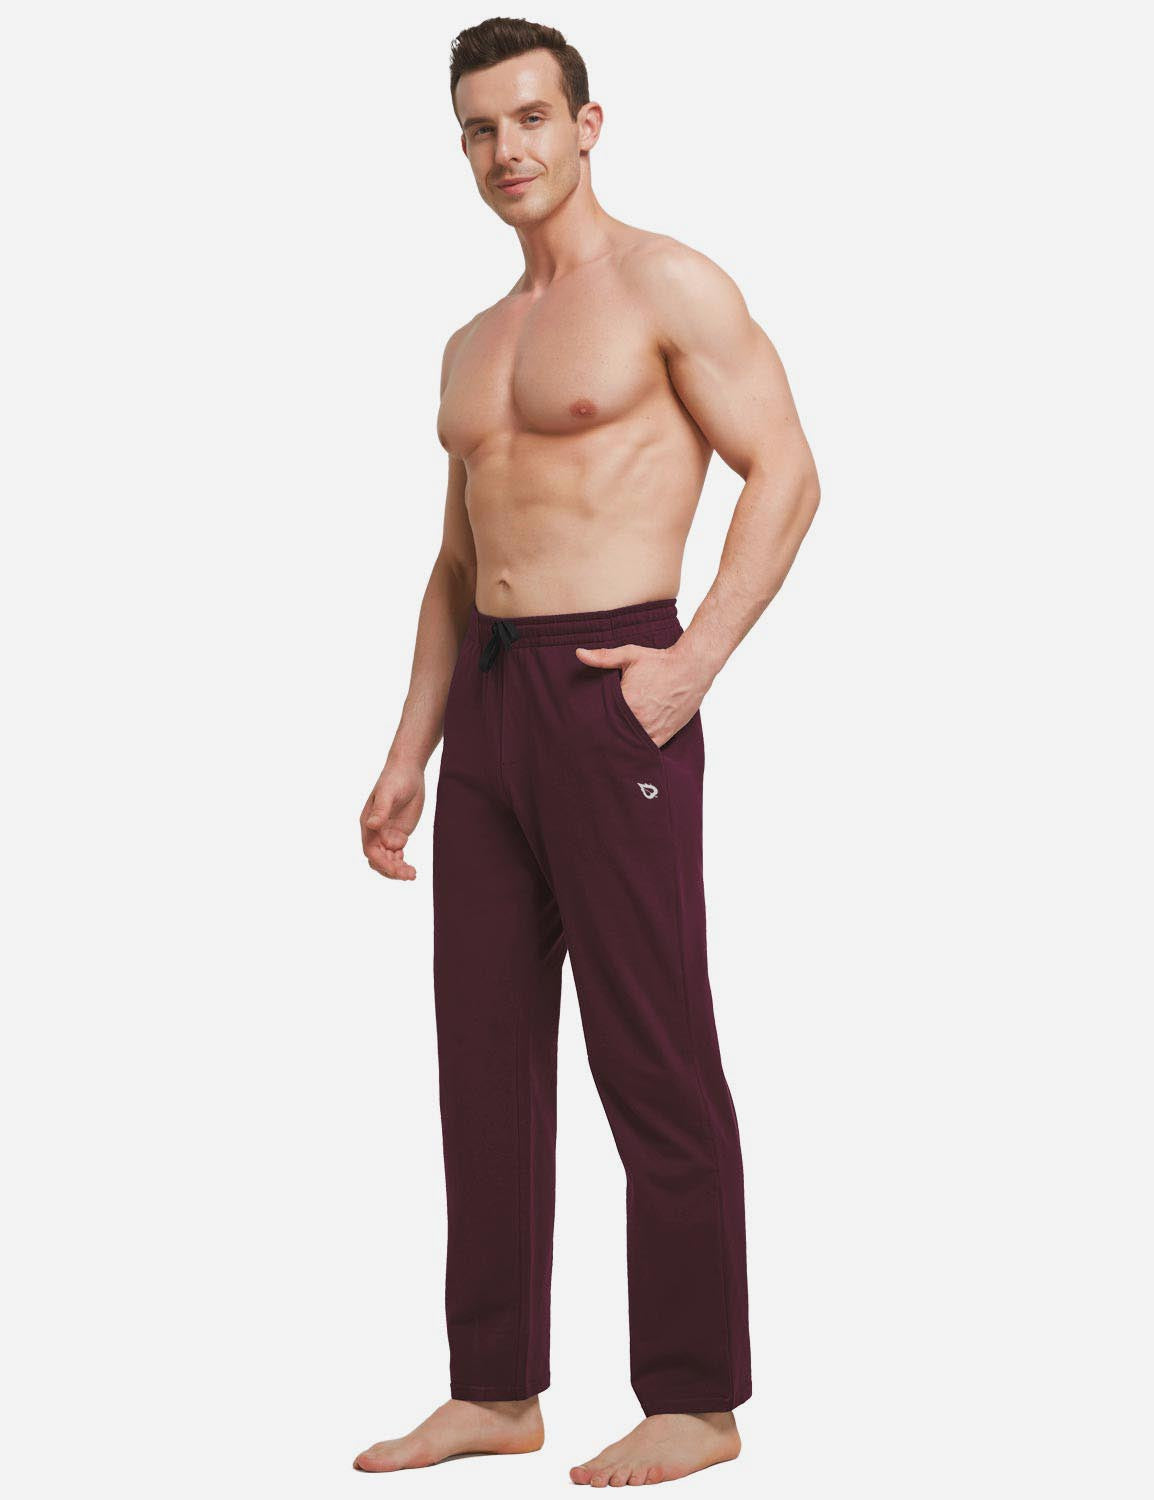 Baleaf Mens Elastic Waistband Loose Fit Side Pocketed Jogger Pants abh146 Wine Red Full